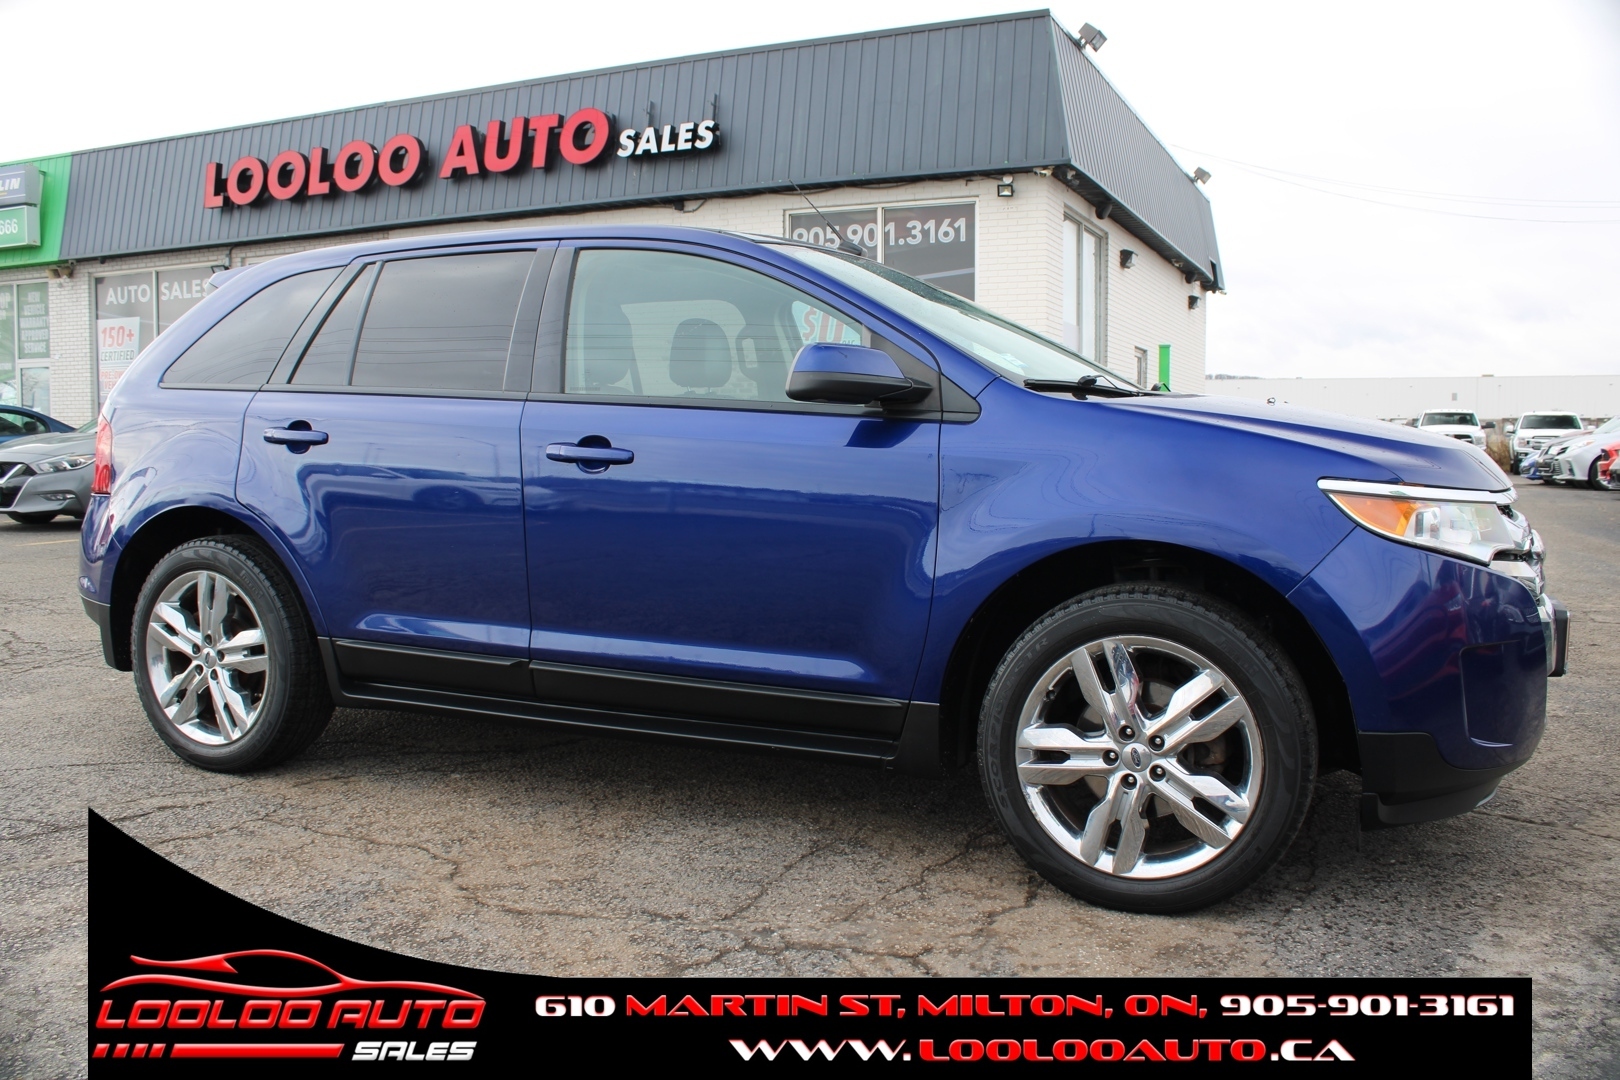 2014 Ford Edge SEL Navigation Leather Panoramic Sunroof $112/Week